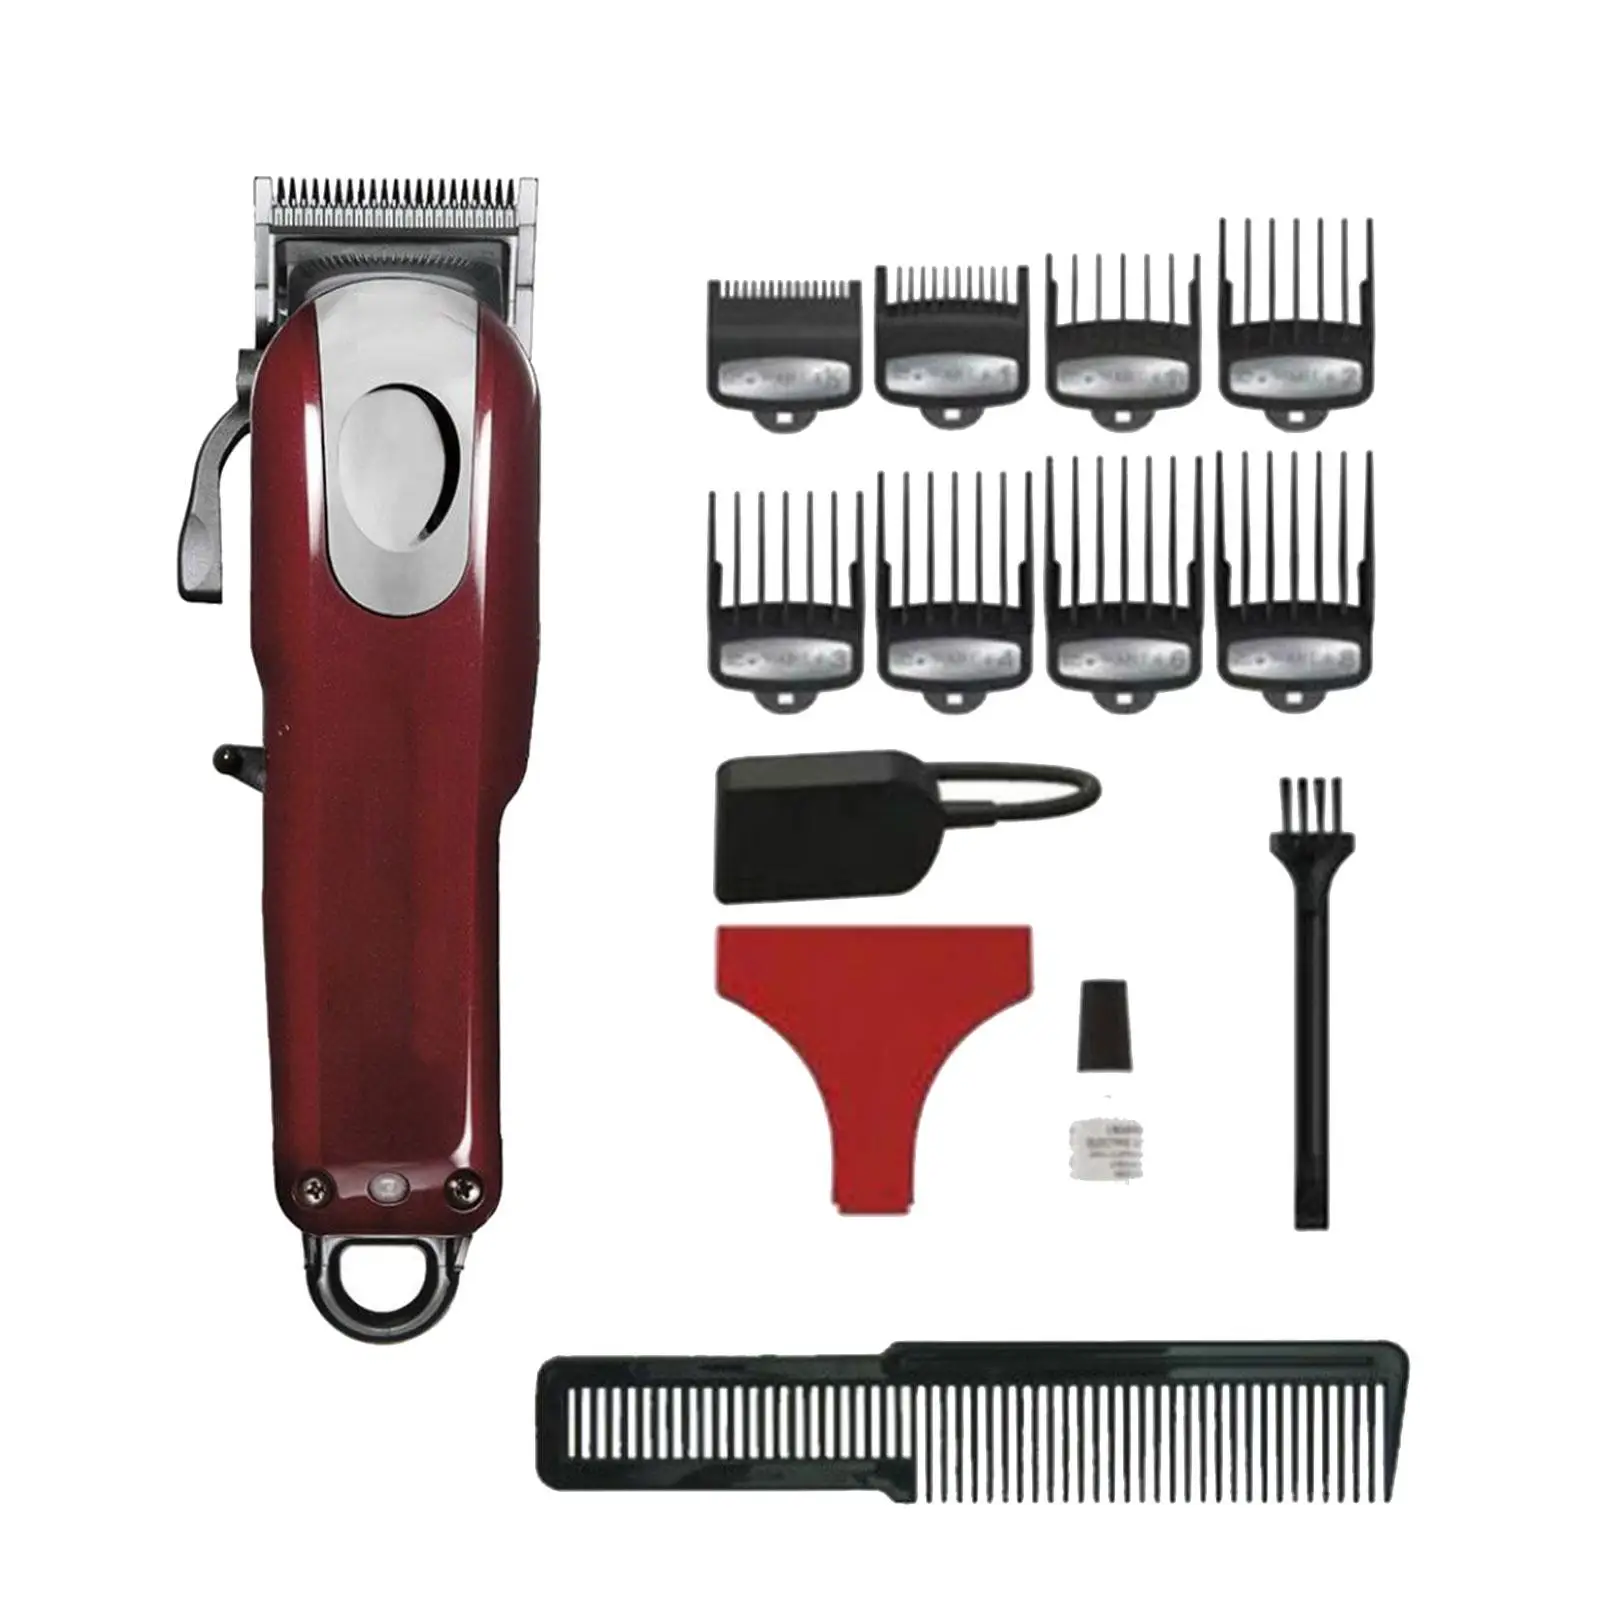 Electric Hair Clipper 8148 US Power Adapter for Stylists Versatile with Oil, Cutting Guides, Styling Comb Professional Grooming